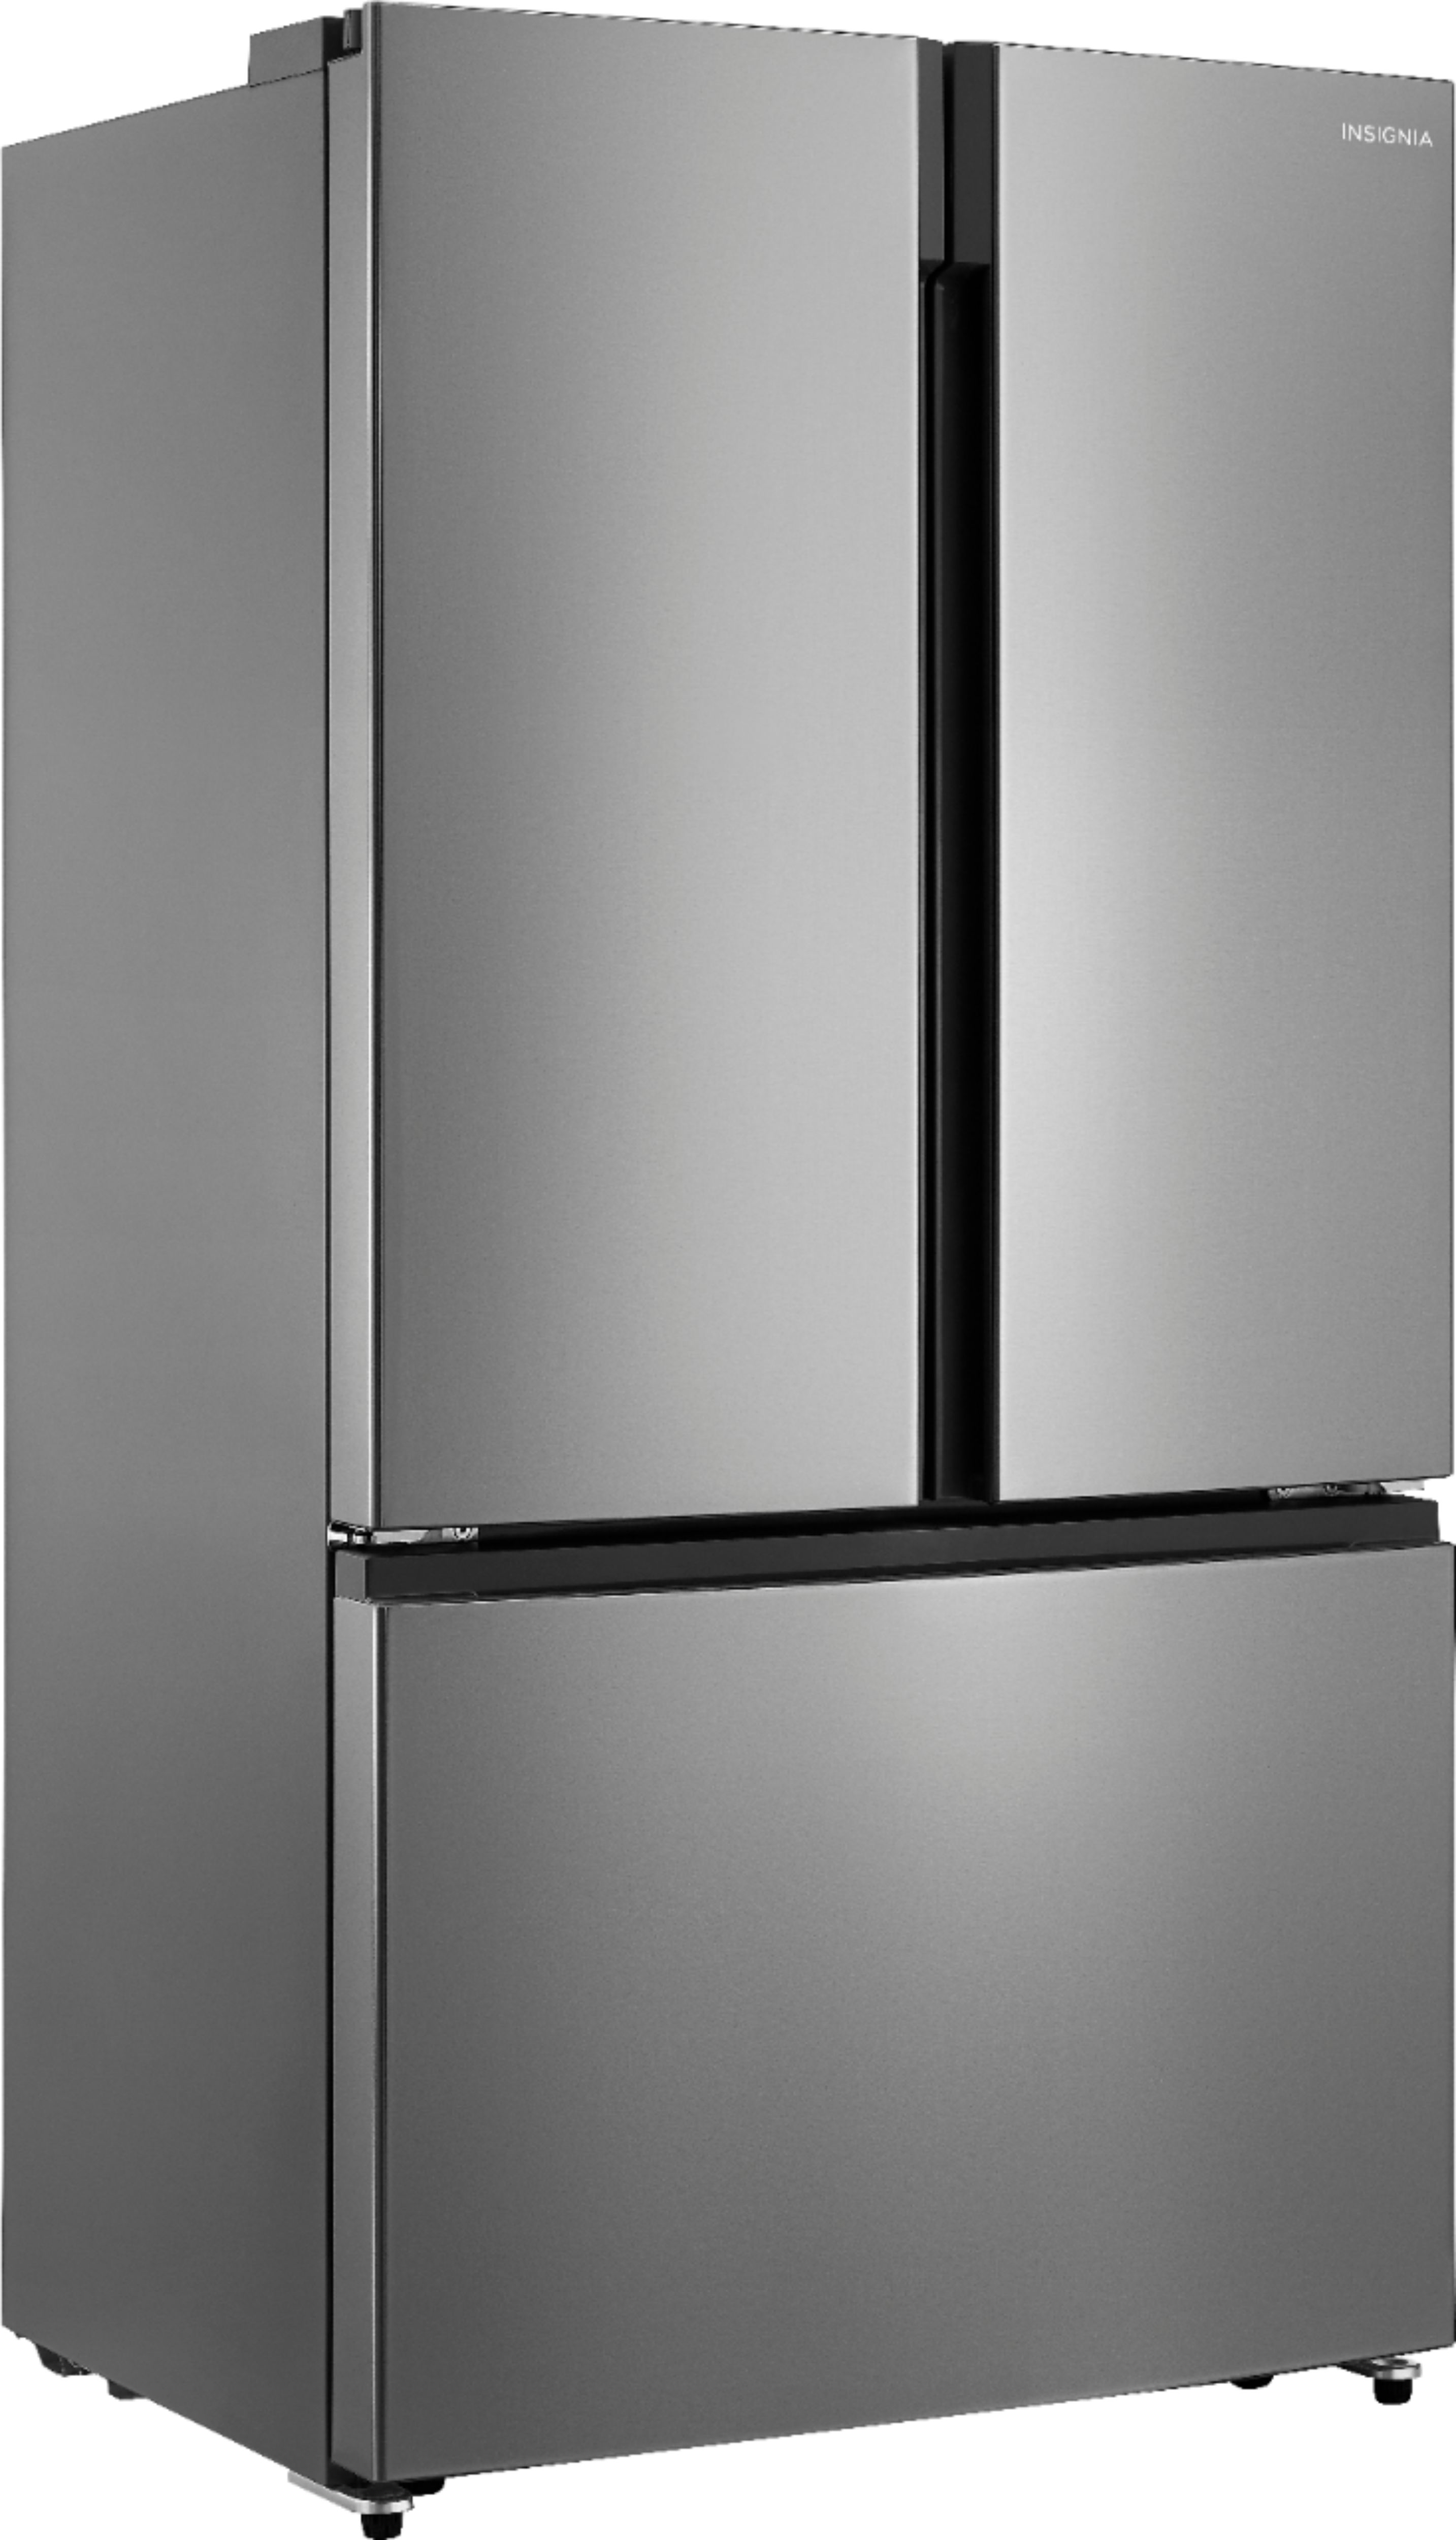 Angle View: Insignia™ - 20.9 Cu. Ft. French Door Counter-Depth Refrigerator - Stainless steel